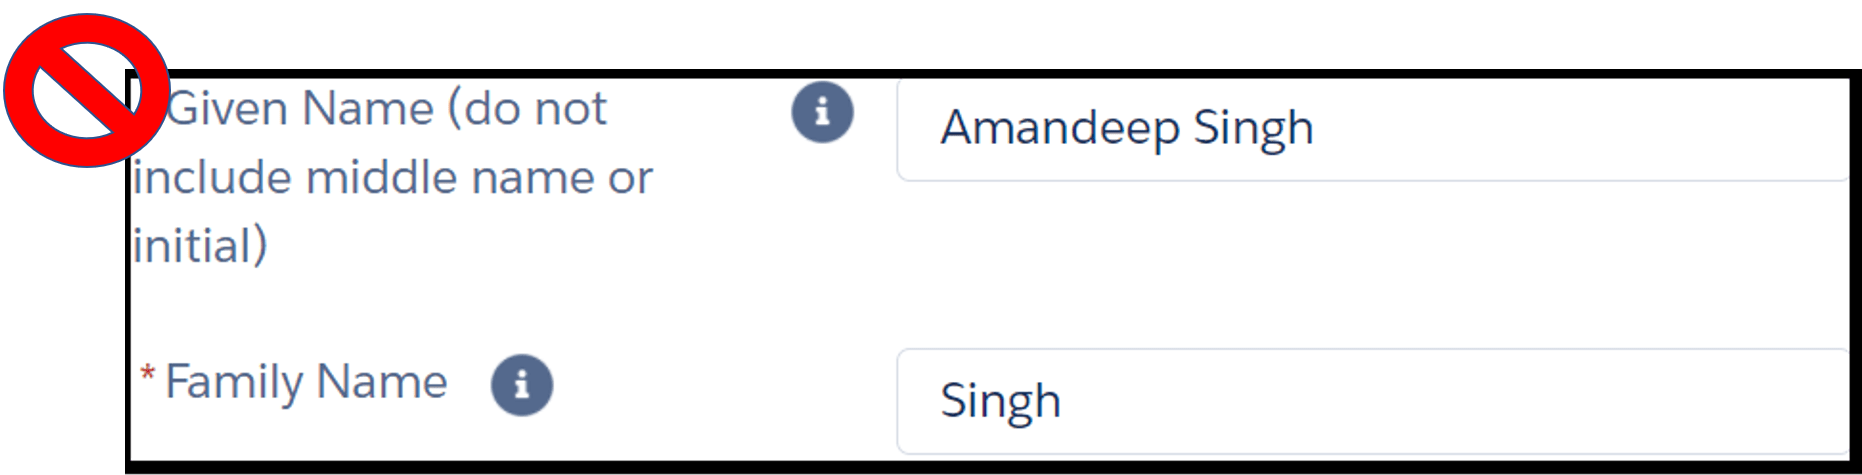 - Image shows two fields in an online form. The instruction next to the first field reads, “* given name (do not include middle name or initial)”. The text entry field to its right shows example “Amandeep Singh”. Instruction for second field reads, “* family name”. The text entry field to its right shows example “Singh”. There is a red “no allowed” symbol next image indicating that fields have been filled out incorrectly.